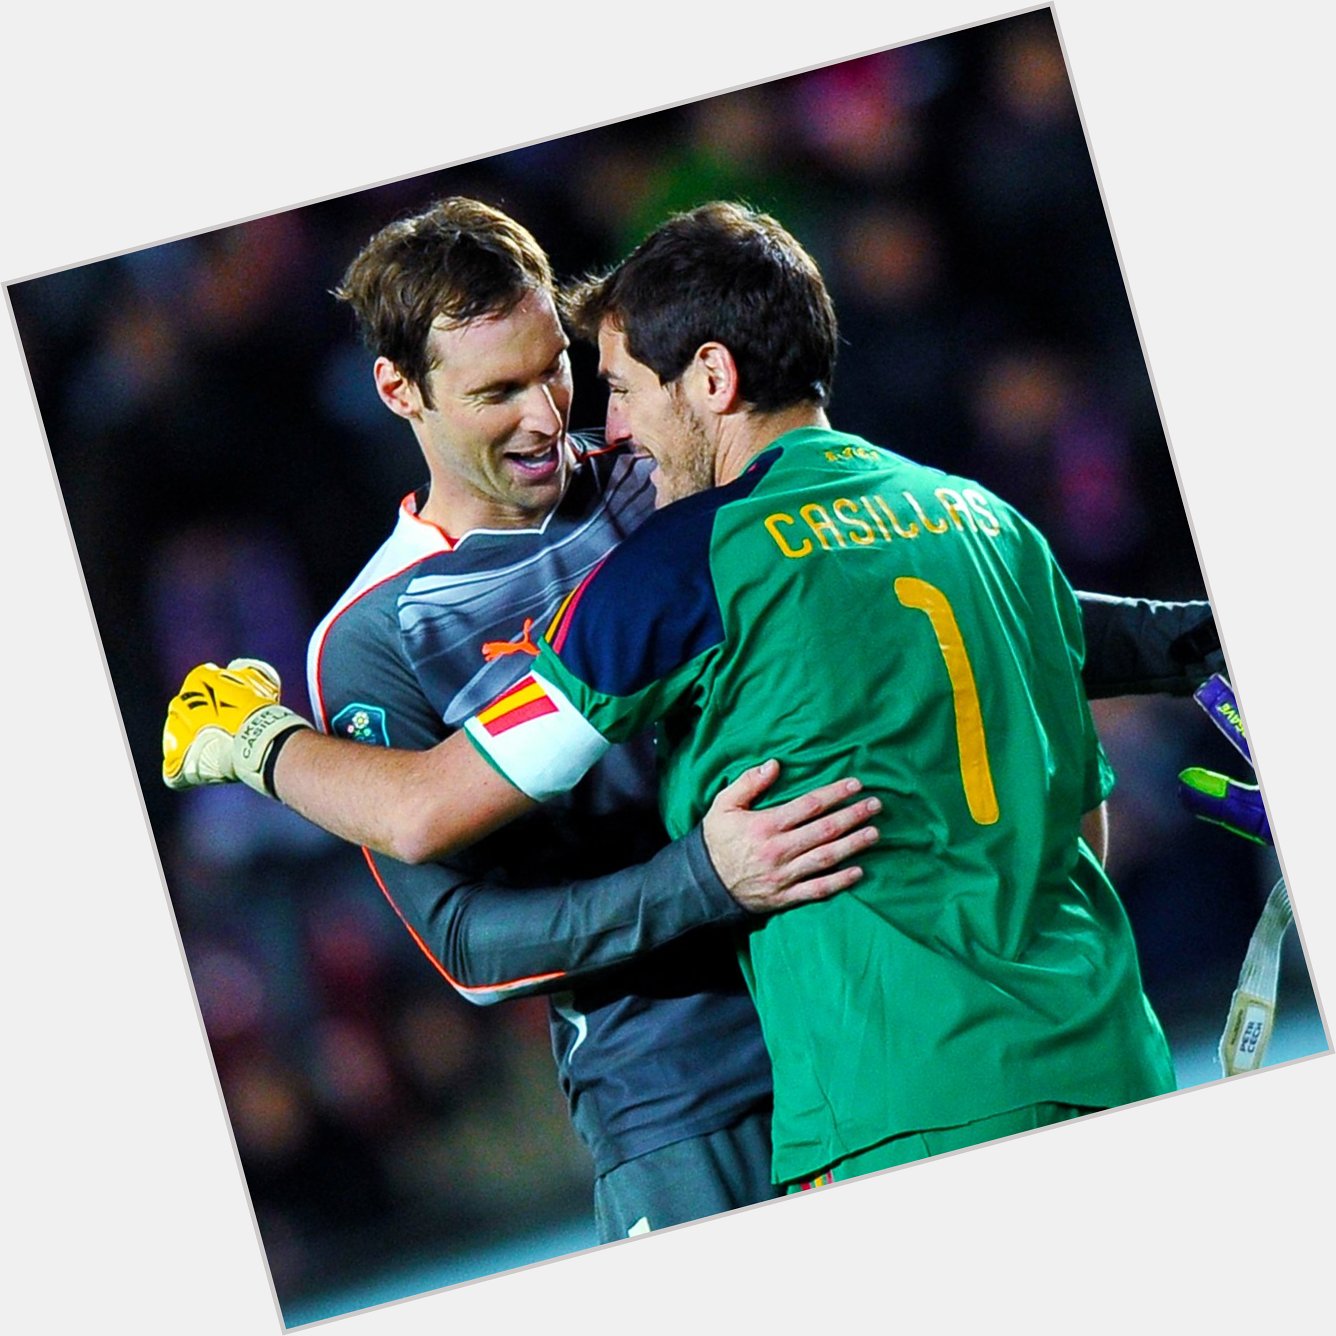 Happy birthday to Petr Cech (35) & Iker Casillas (36) Two goalkeeping legends

If you had to pick one 